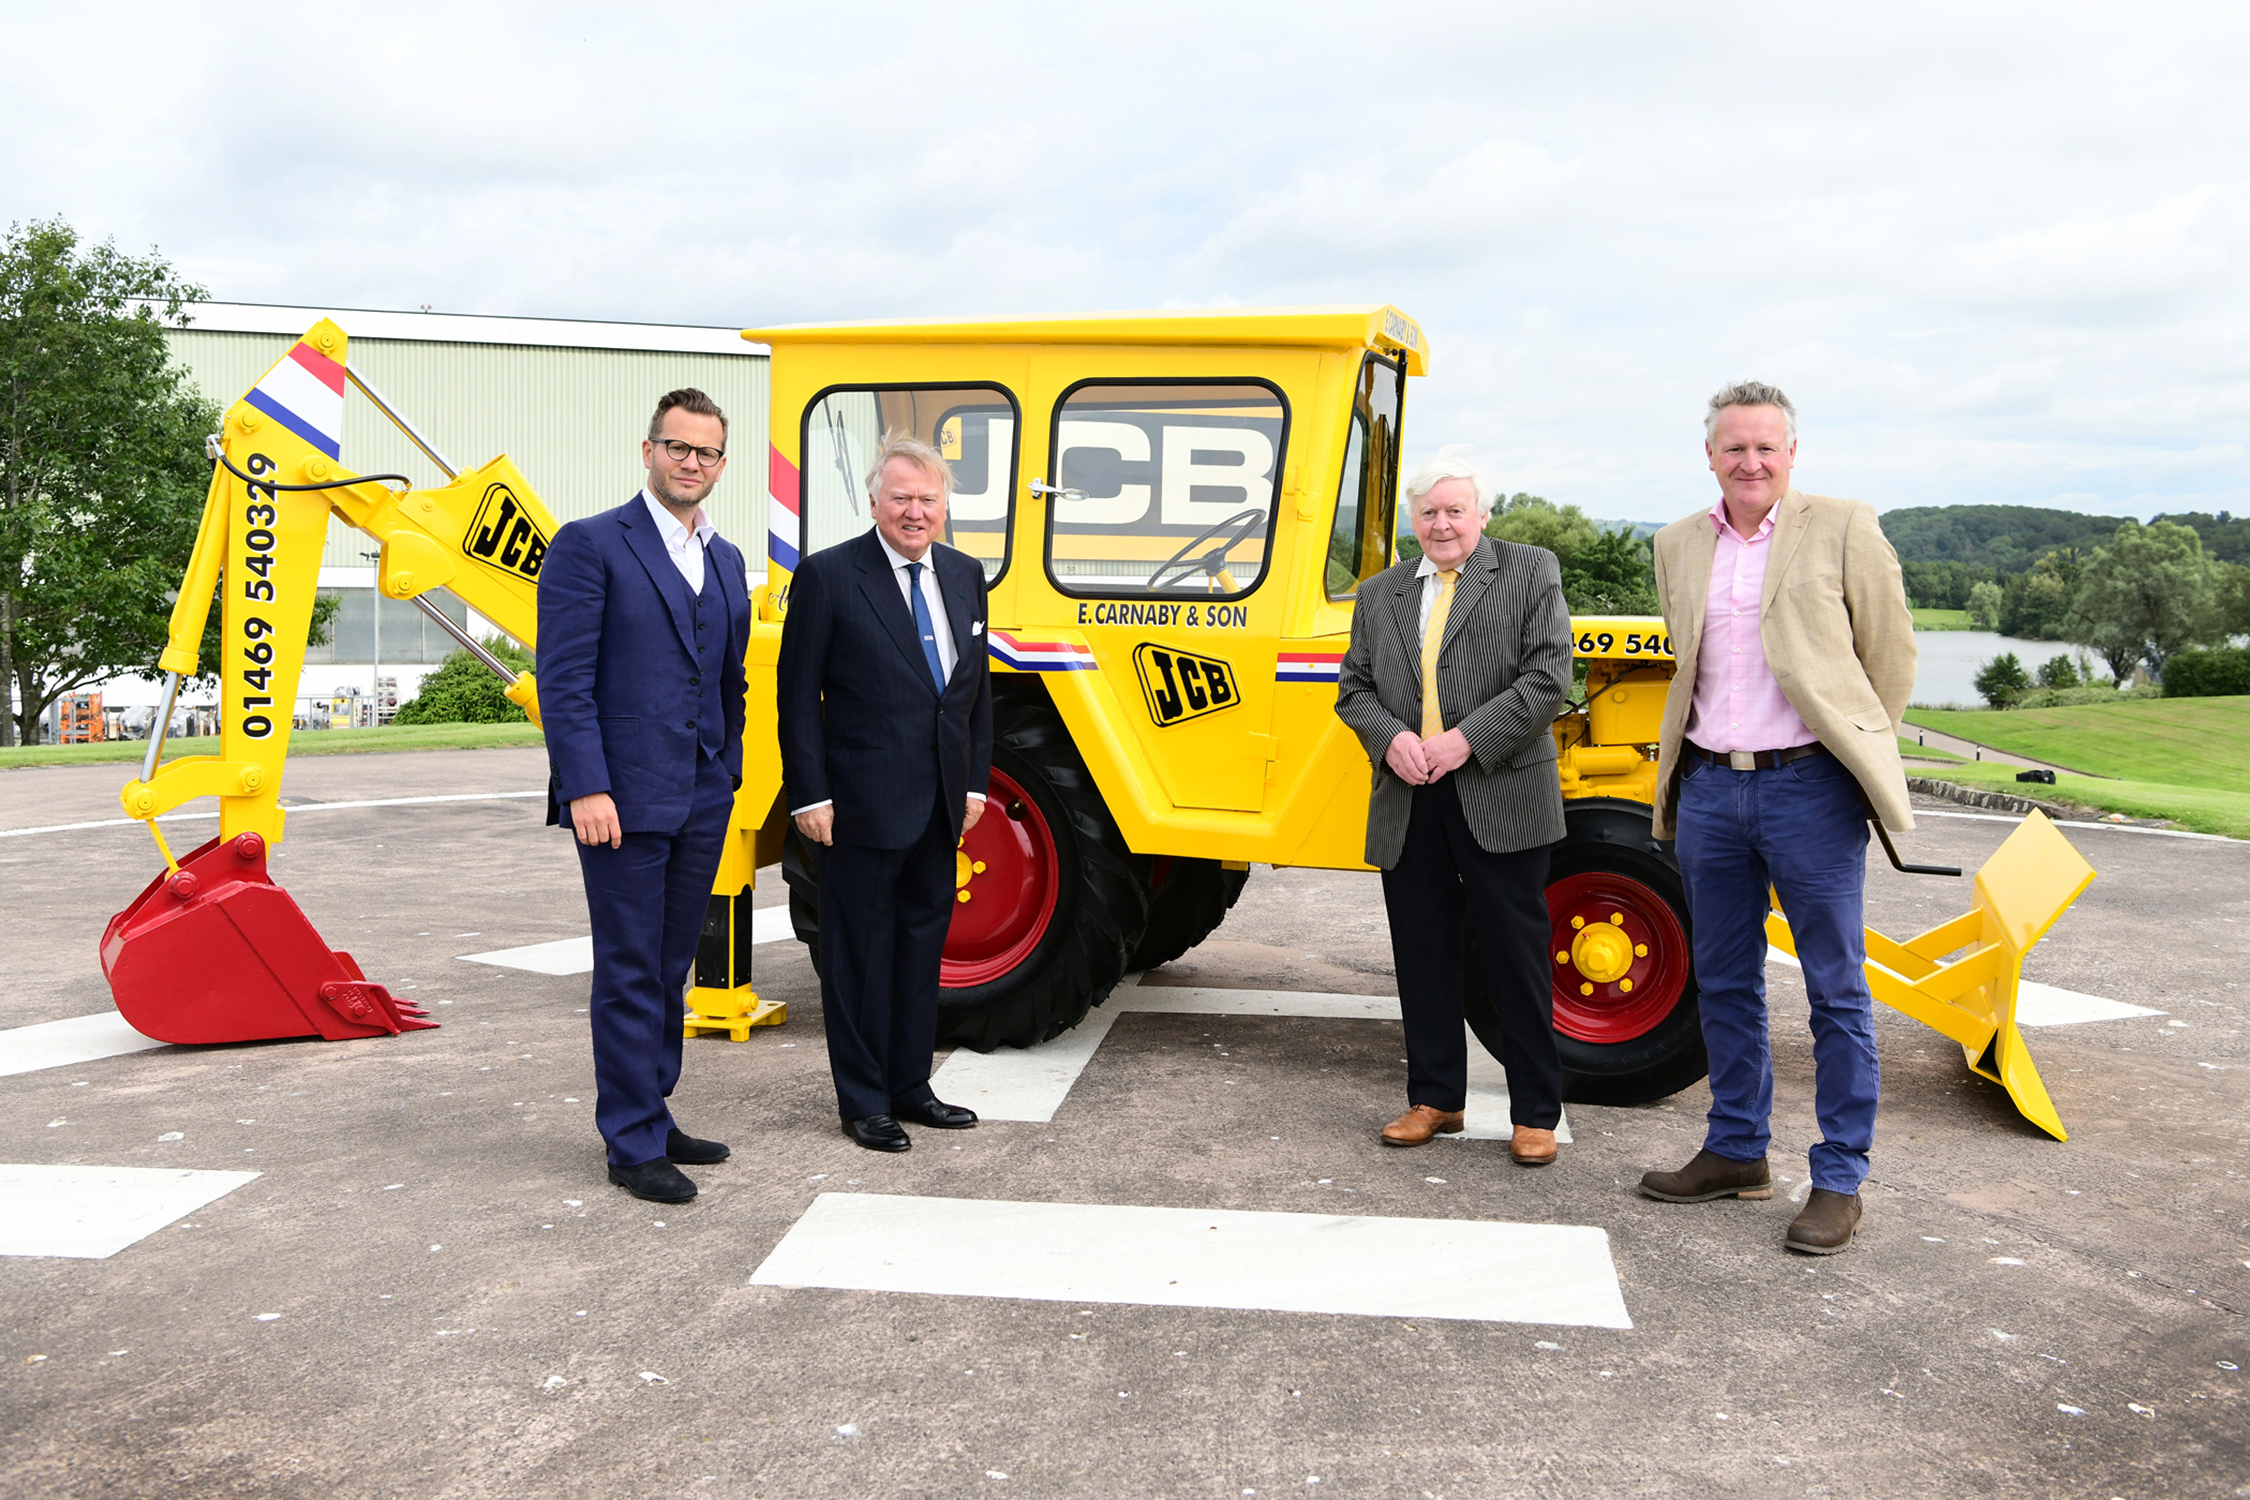 JCB on X: Two family businesses - both in their 3rd generation -  supporting each other for over 60 years. JCB Chairman Lord Bamford and his  son George Bamford, meet Roland Carnaby